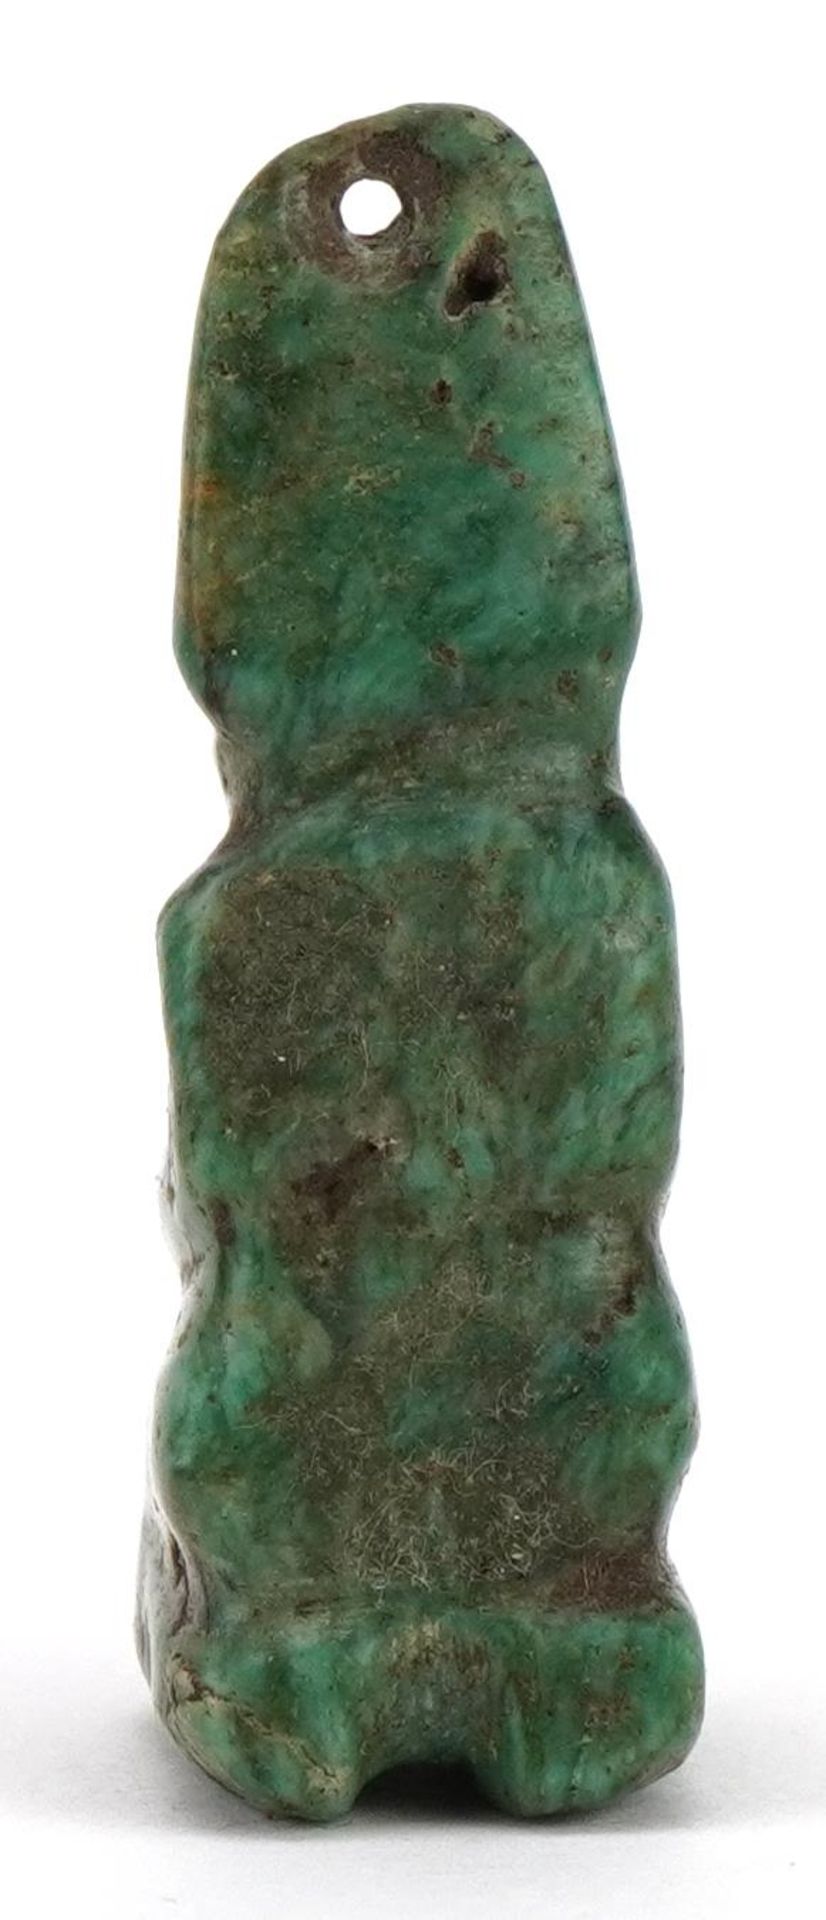 Tribal interest green hardstone figural pendant, probably Mayan or pre Columbian, 4.5cm high : For - Image 4 of 7